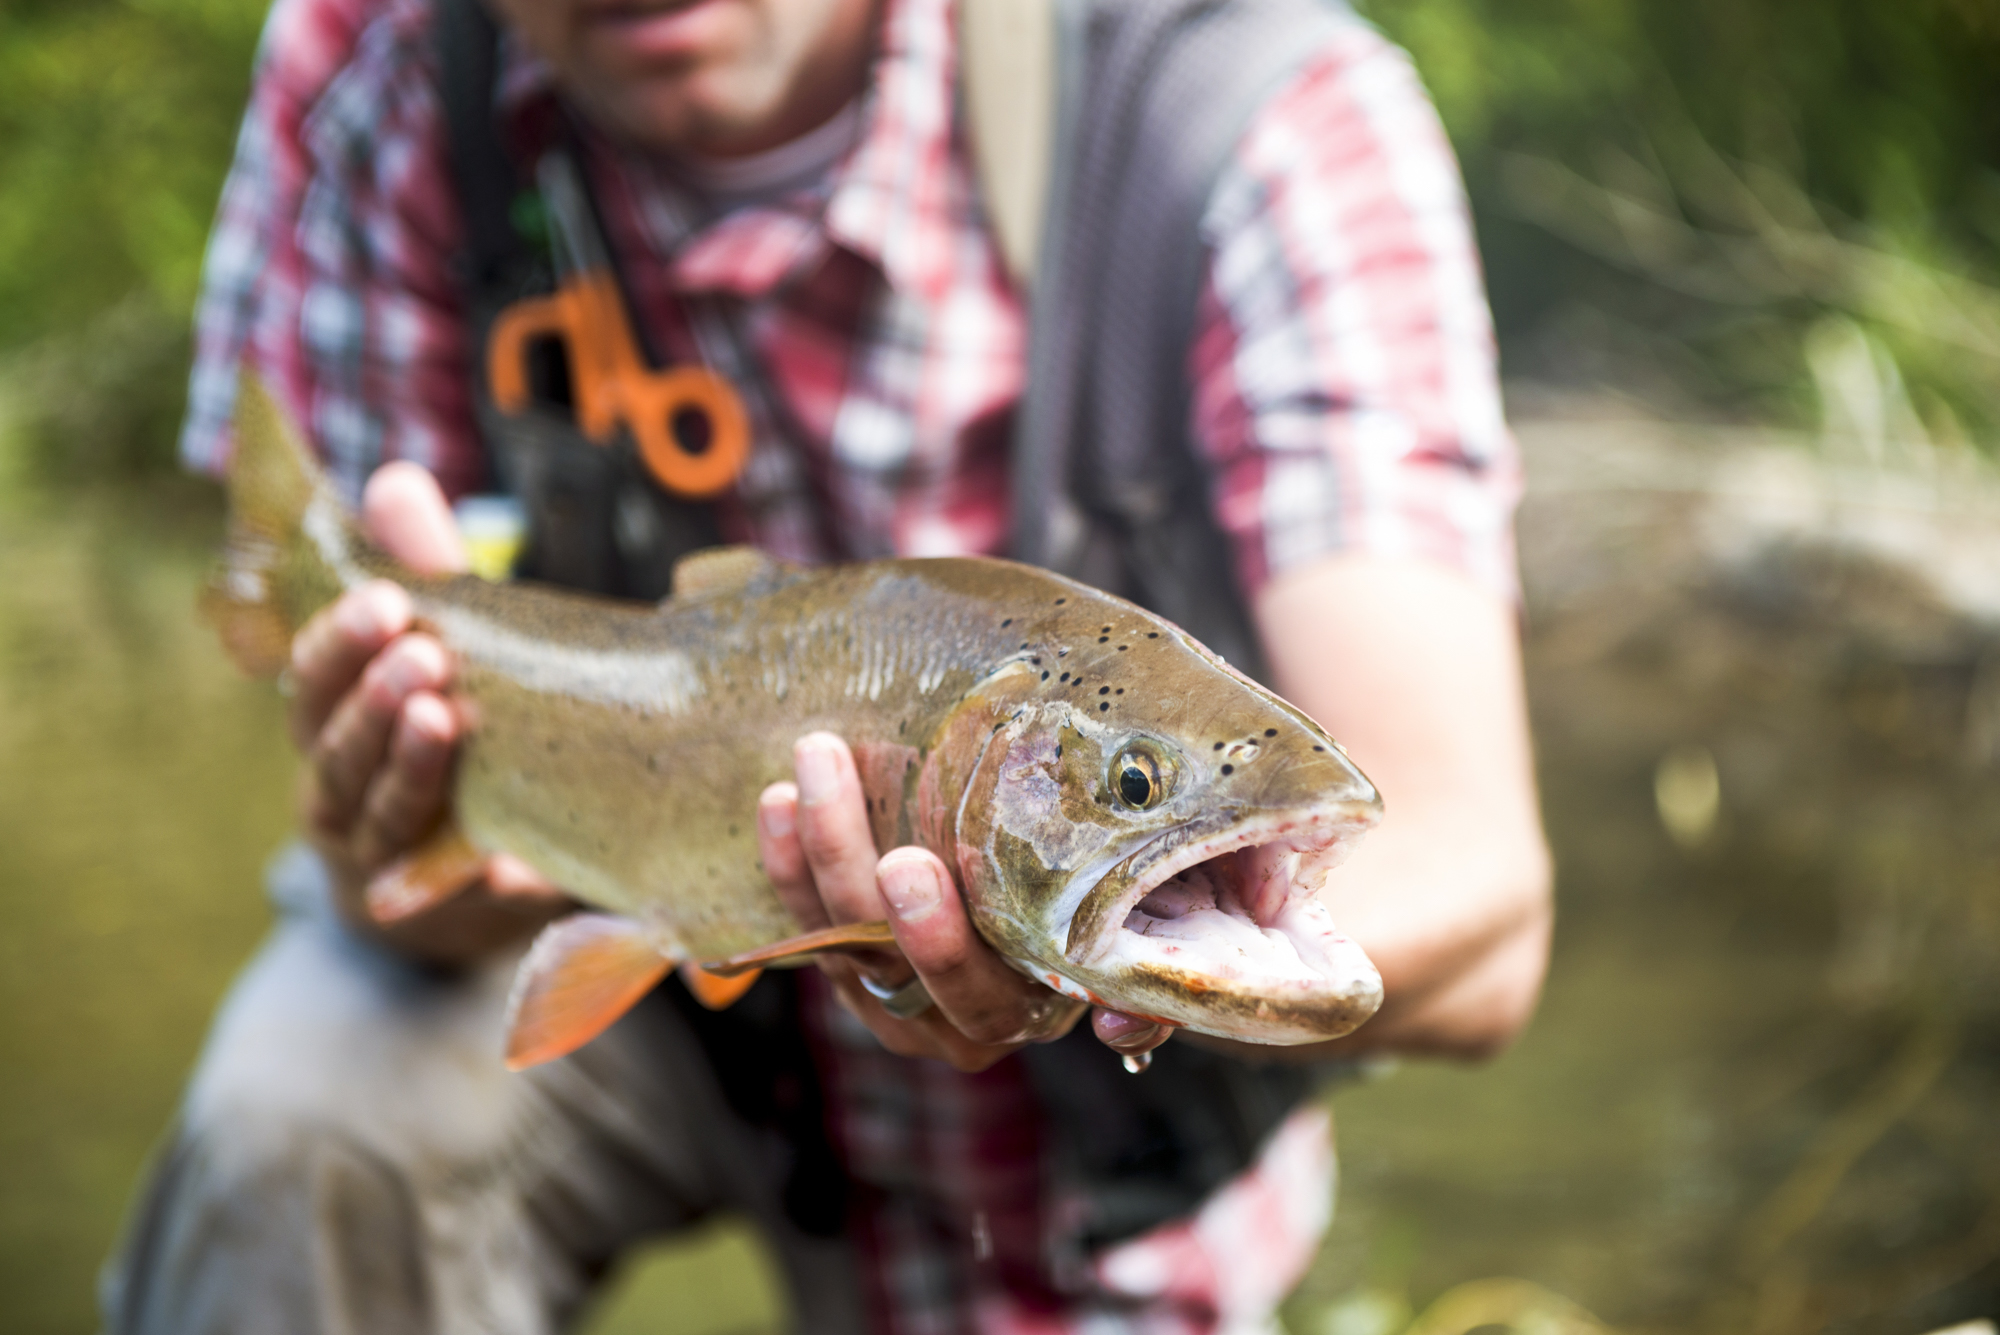 Provo River Fishing Regulations - Know the Rules and Protect our Fishery